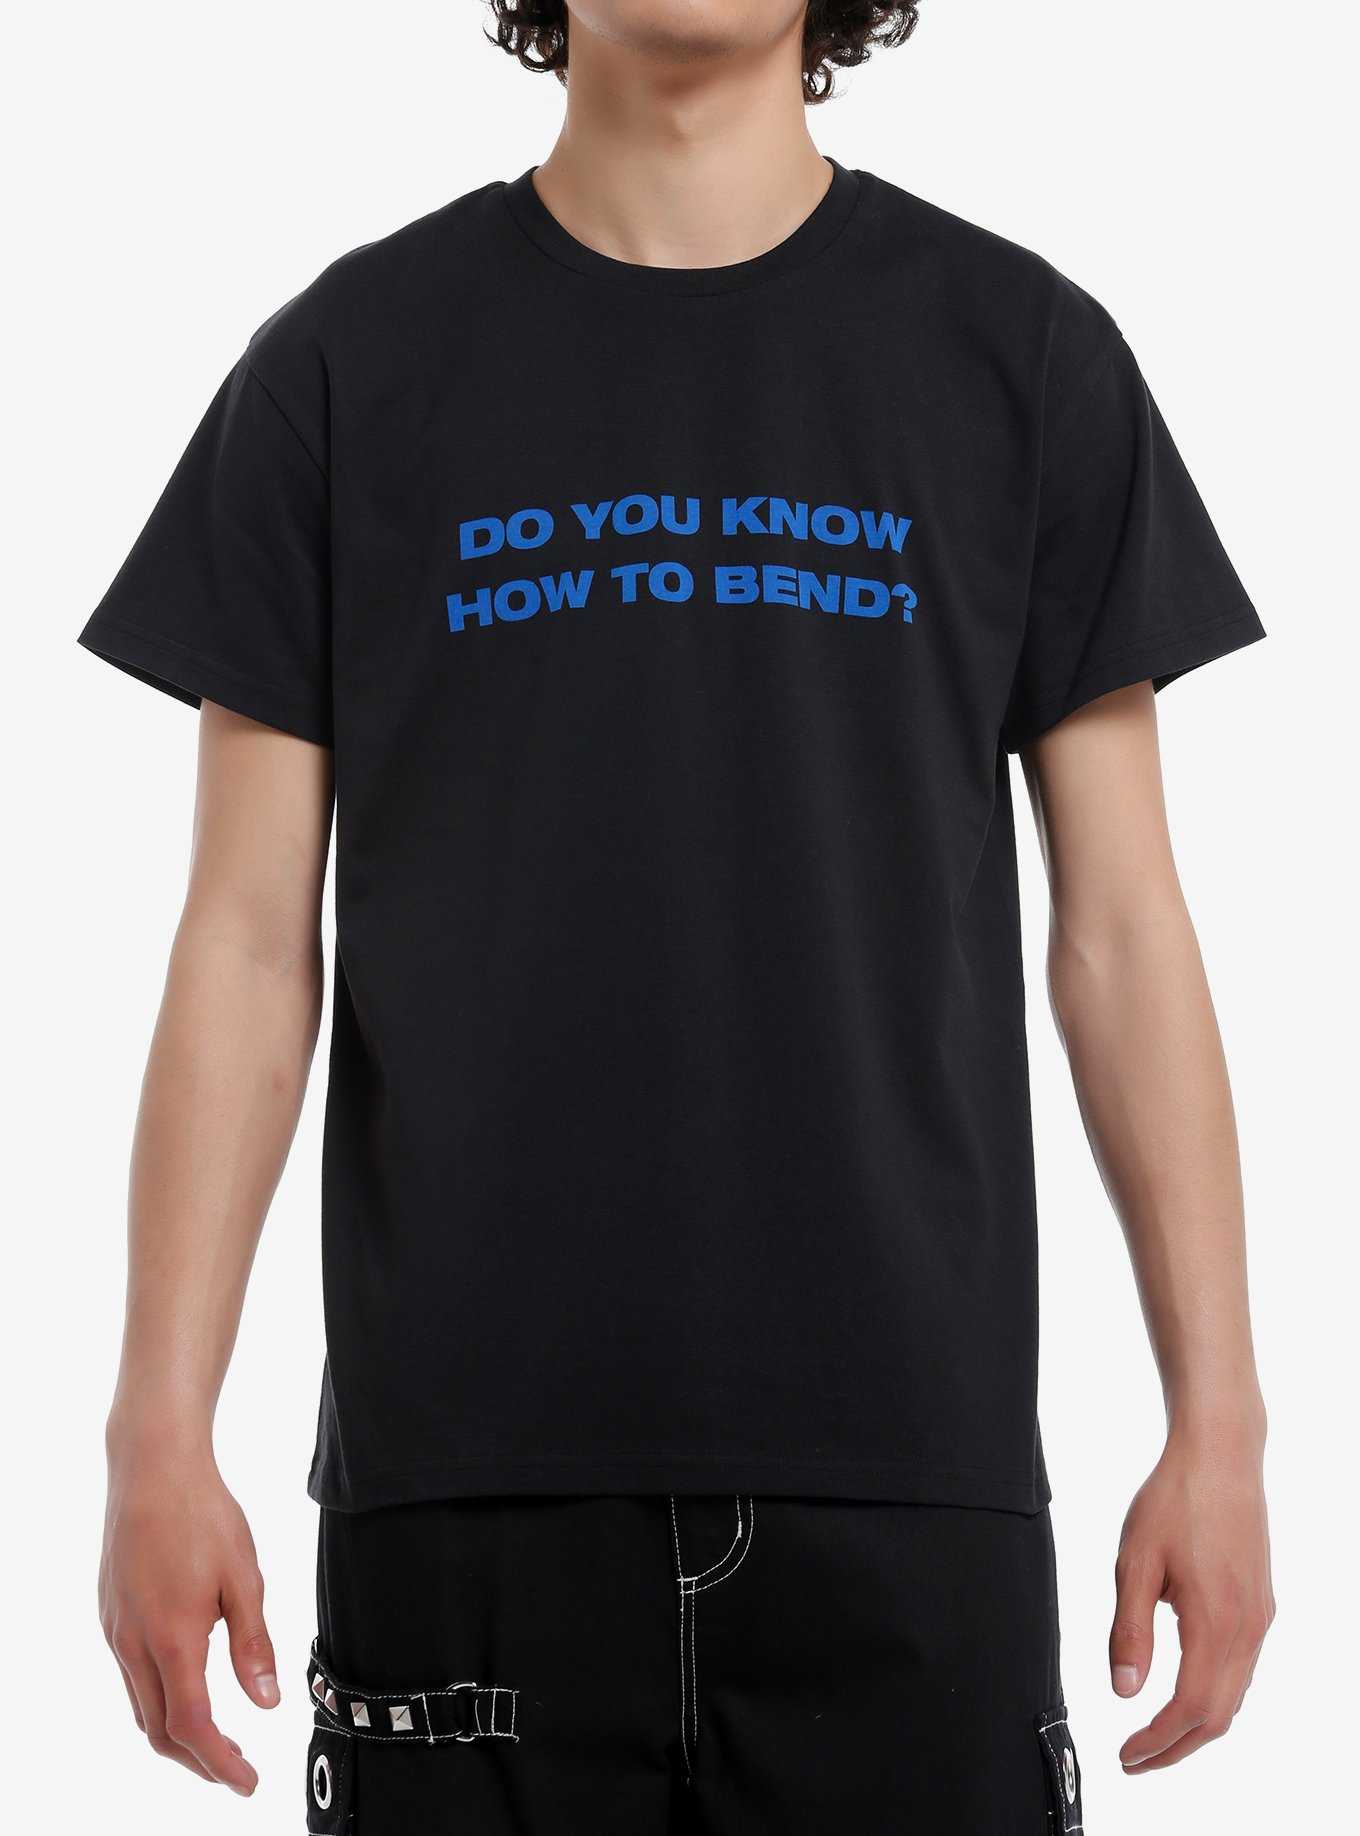 Billie Eilish Do You Know How To Bend? T-Shirt Hot Topic Exclusive, , hi-res